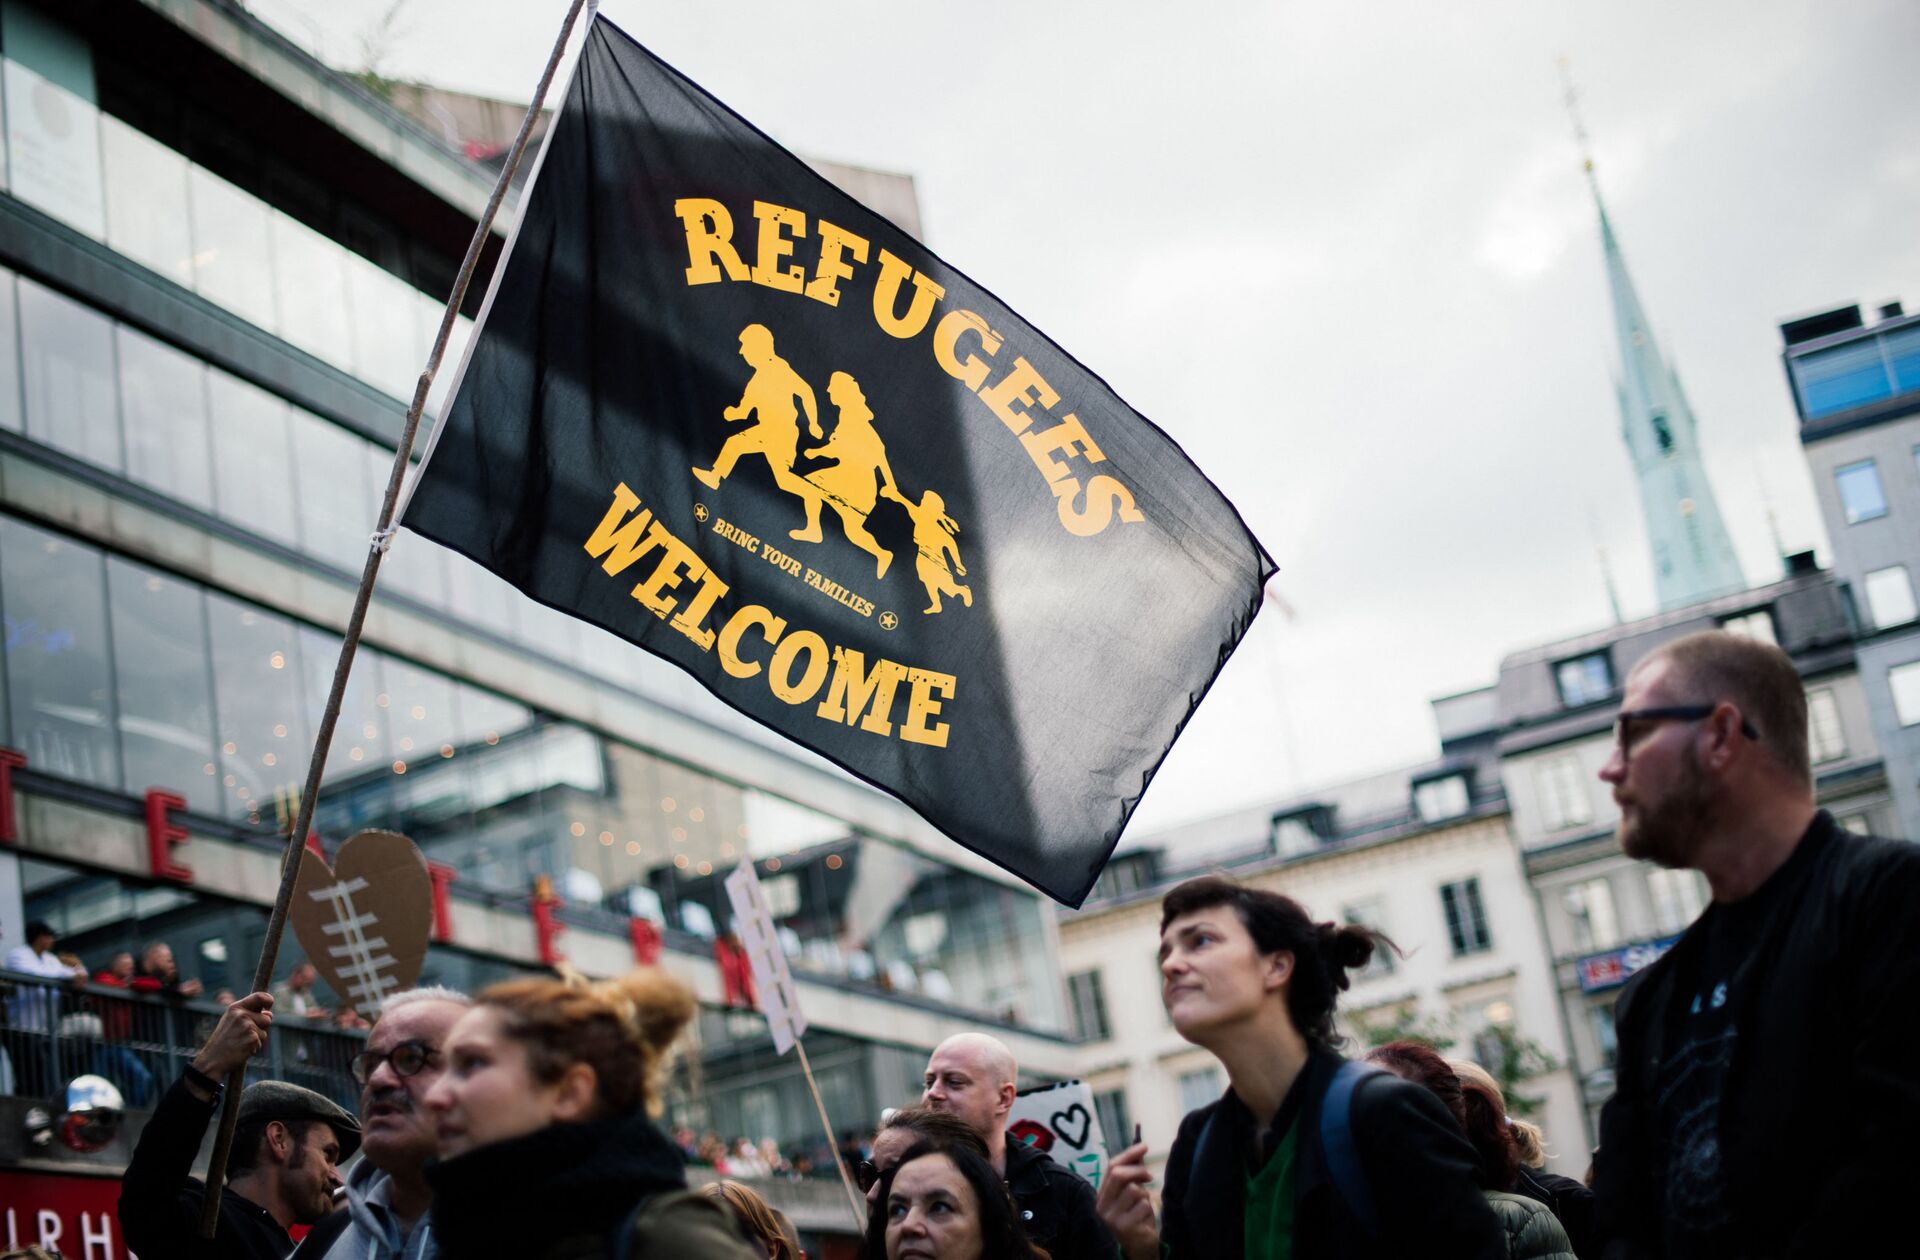 People take part in a demonstration in solidarity with migrants seeking asylum in Europe after fleeing their home countries in Stockholm on September 12, 2015. - Sputnik International, 1920, 07.09.2021